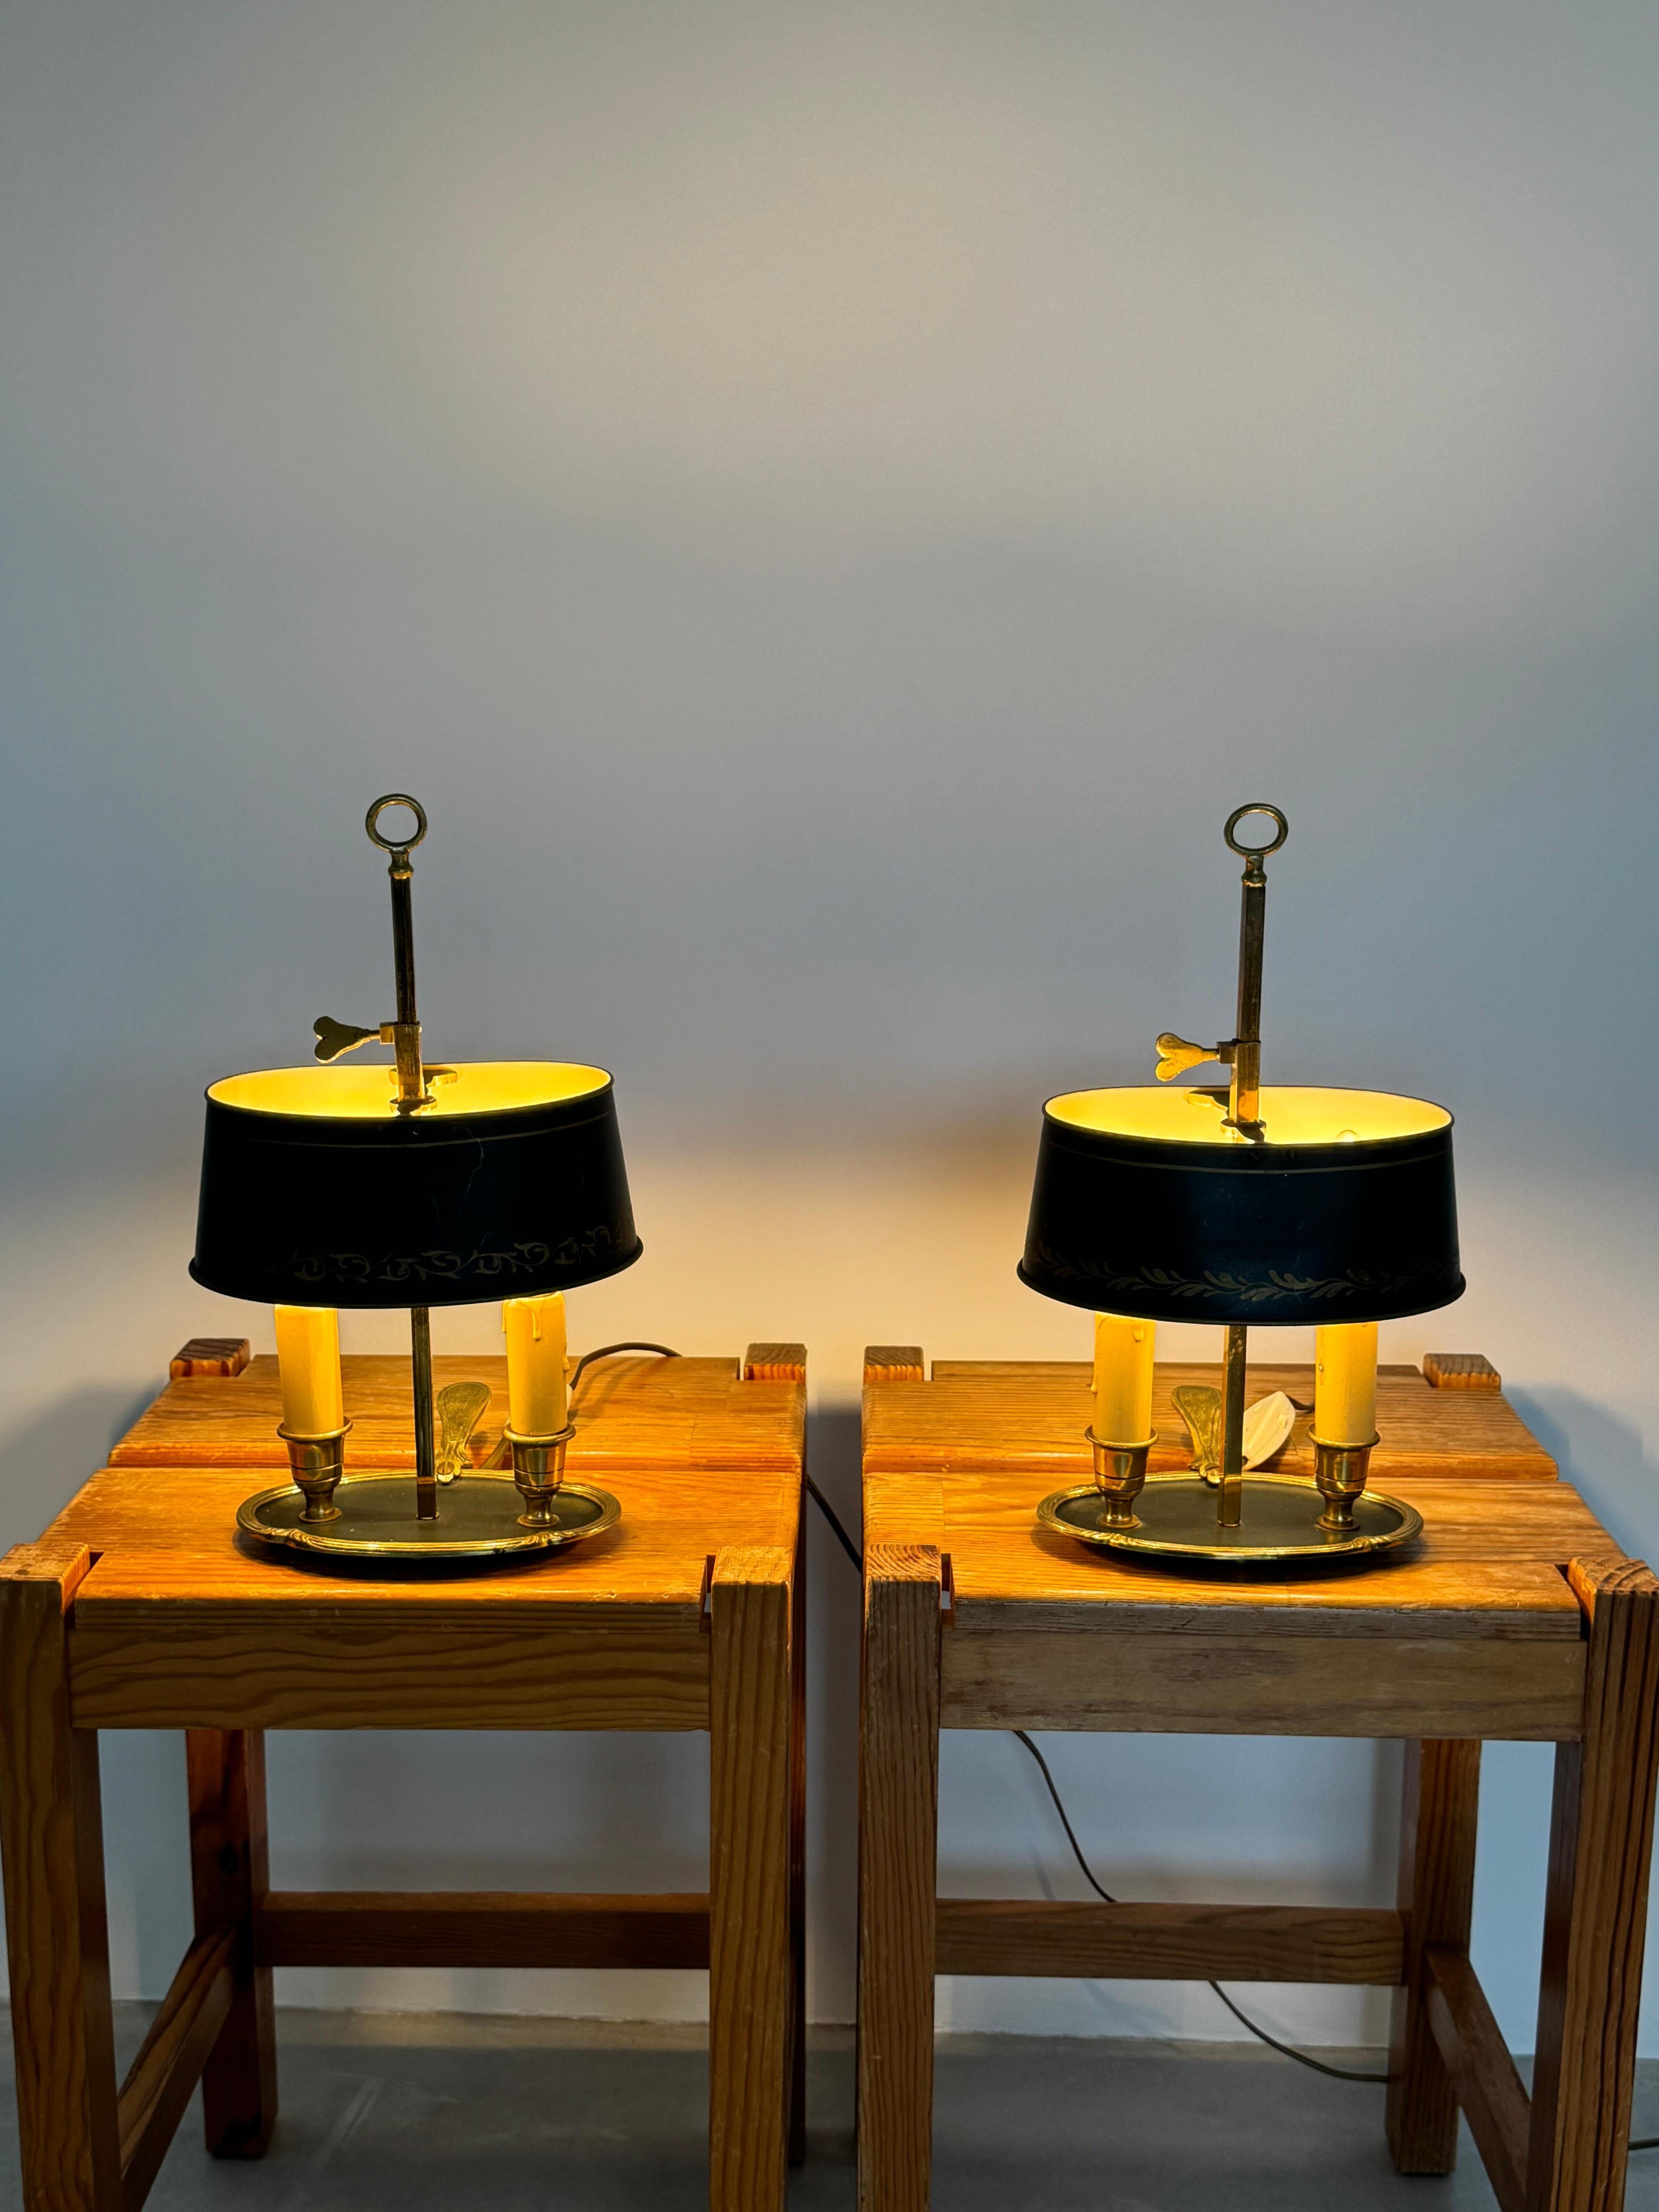 Uncommon pair of little Bouillotte bedside lamp.

Gilded bronze and adjustable metal lampshade.

These lamps are adjustable using a screw system so that its lampshade can be placed at the height of the candles. This allows you to illuminate your